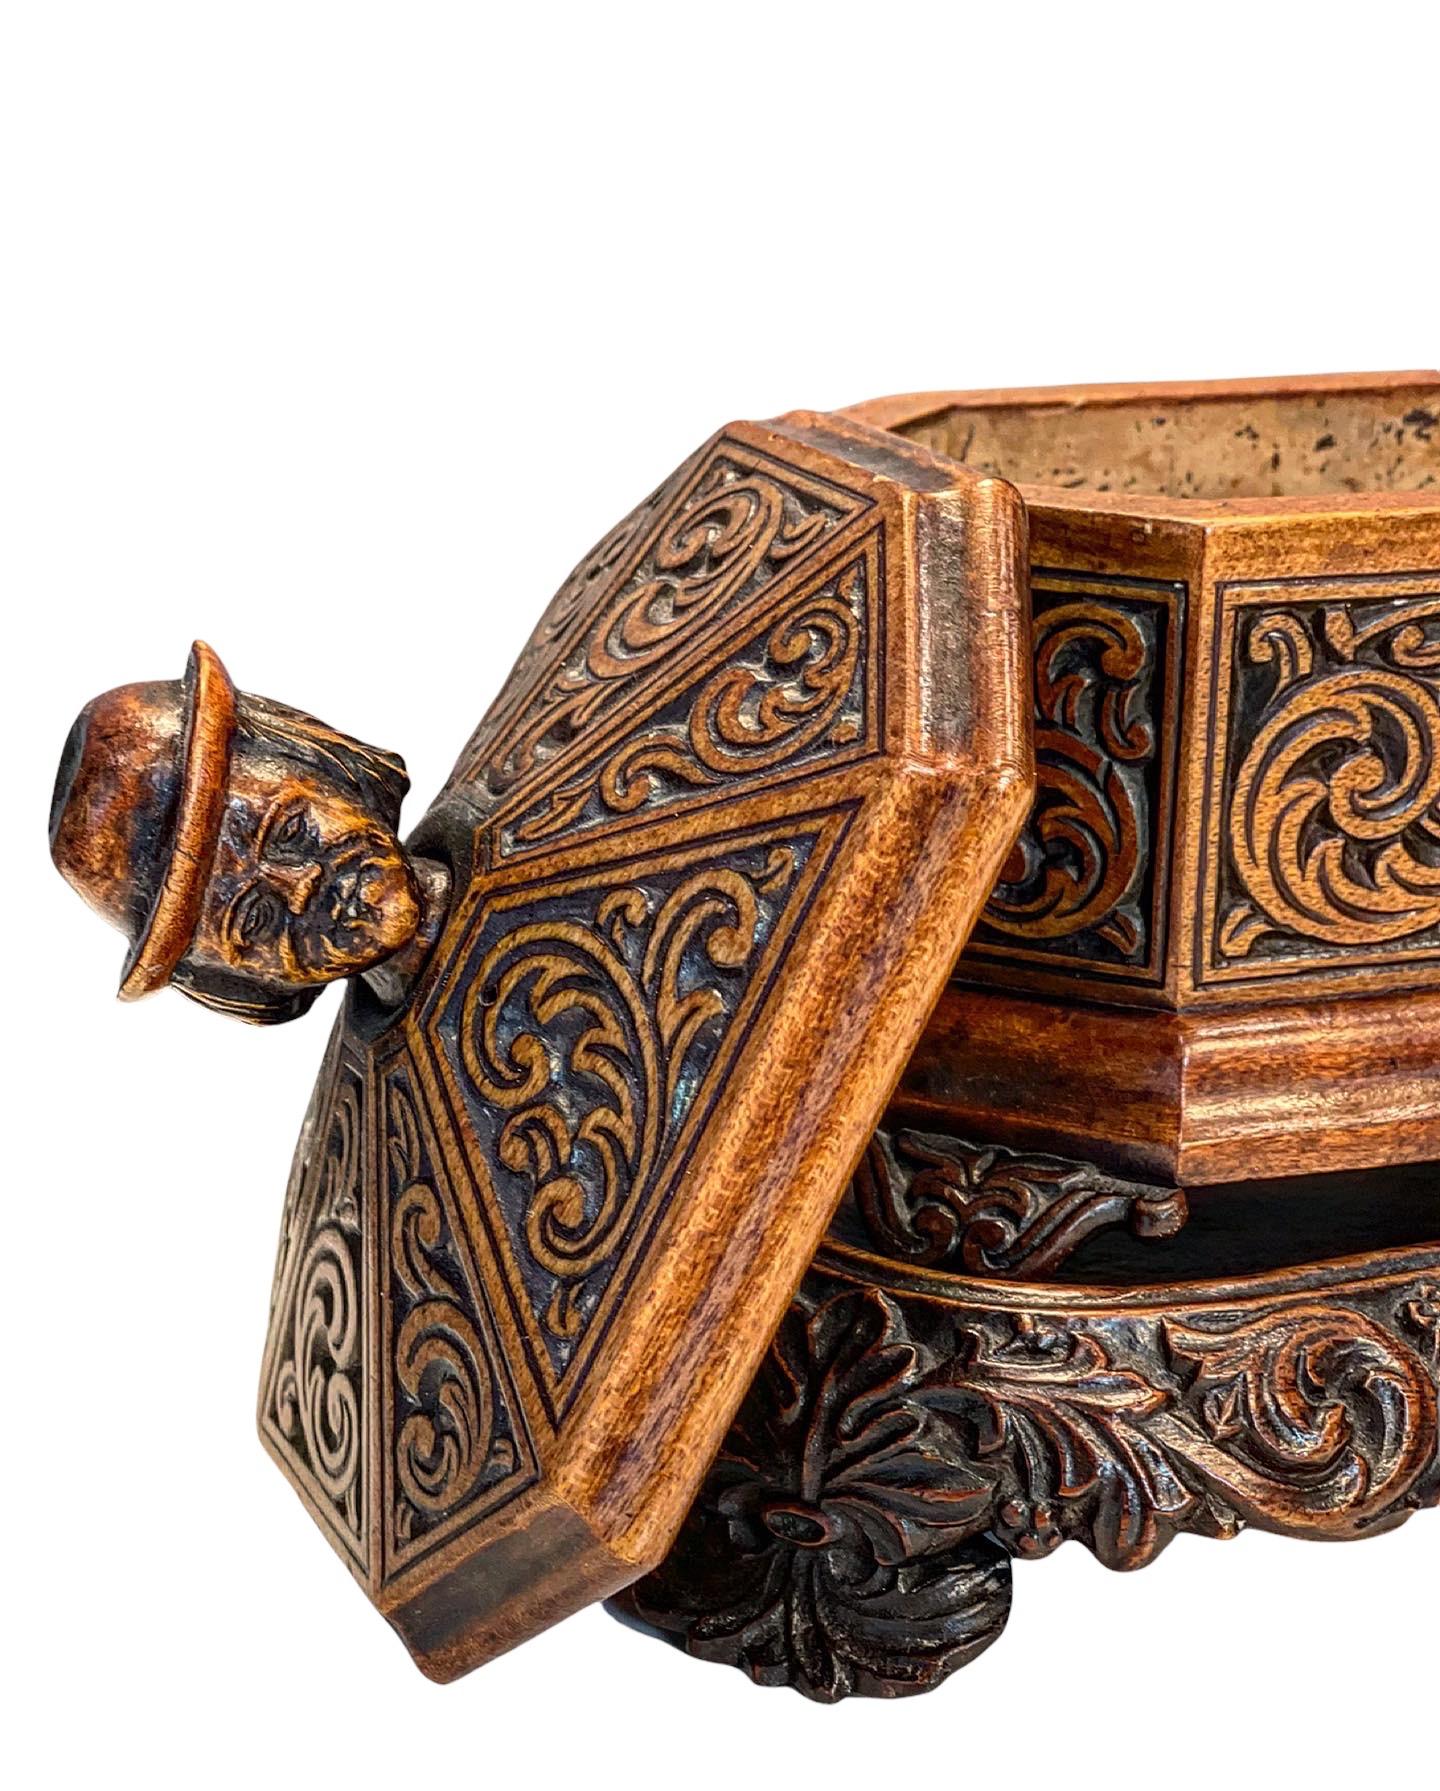 18th century Georgian hand-carved walnut wood tobacco box on its original stand. This is an extremely fine and rare piece and one of its kind. 
   